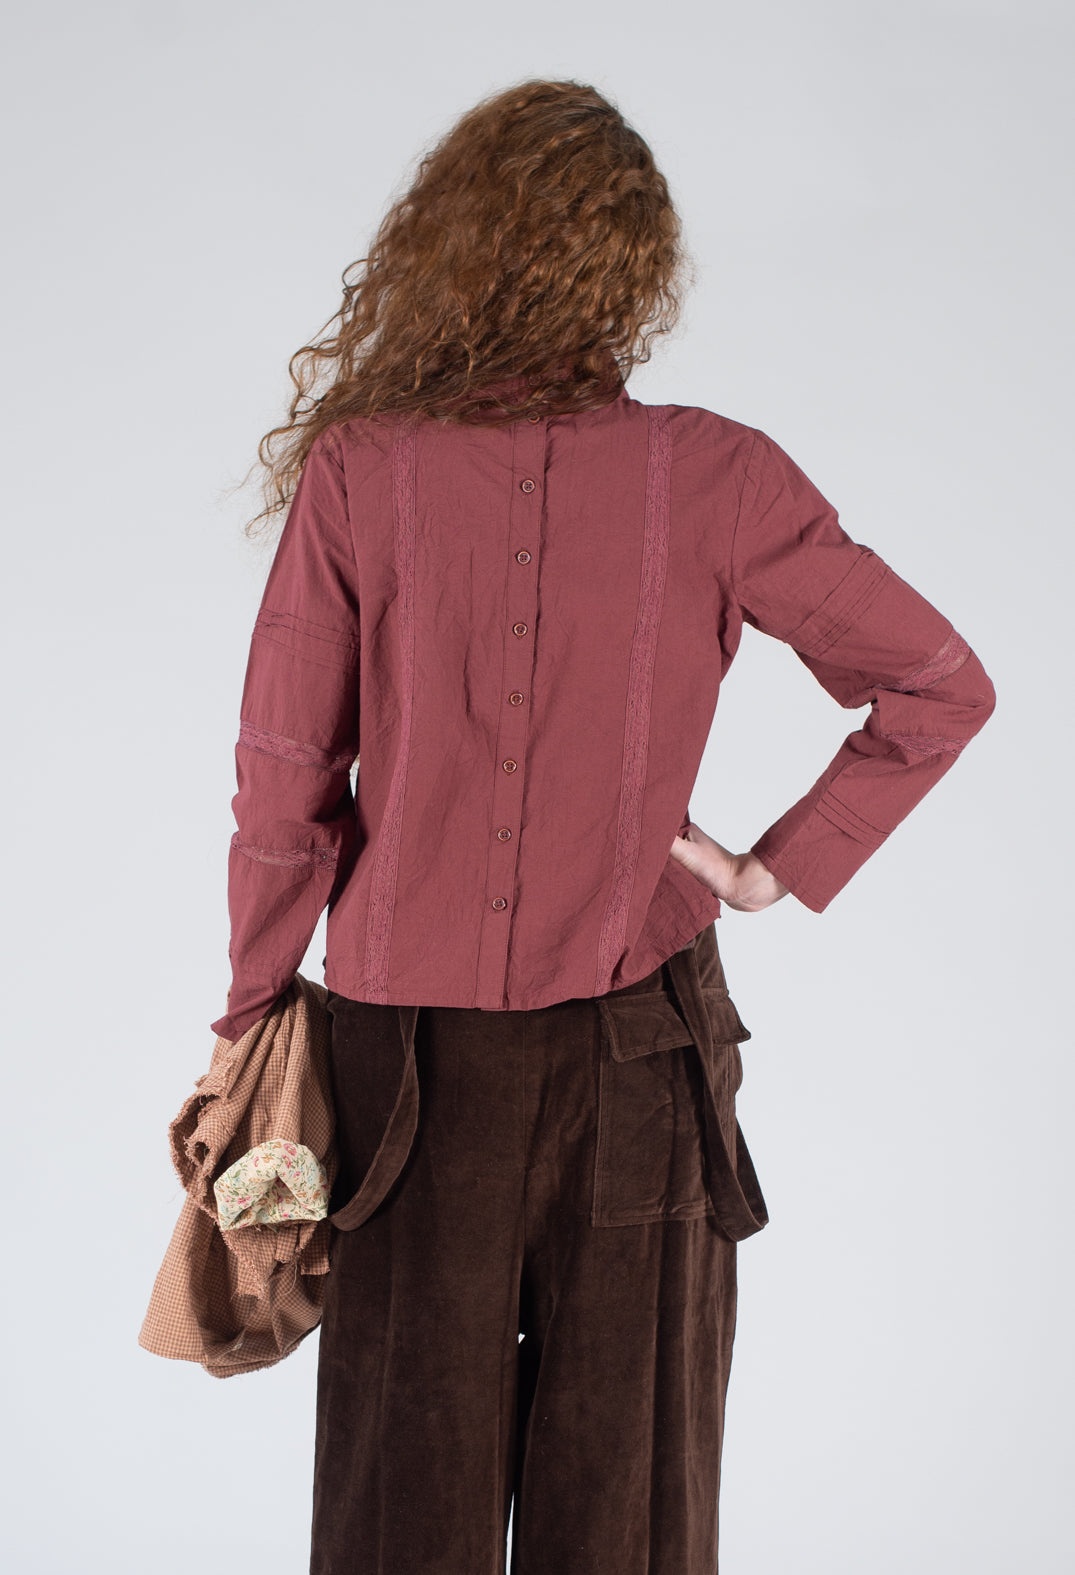 Long Sleeved Blouse with High Collar and Lace Details in Maroon